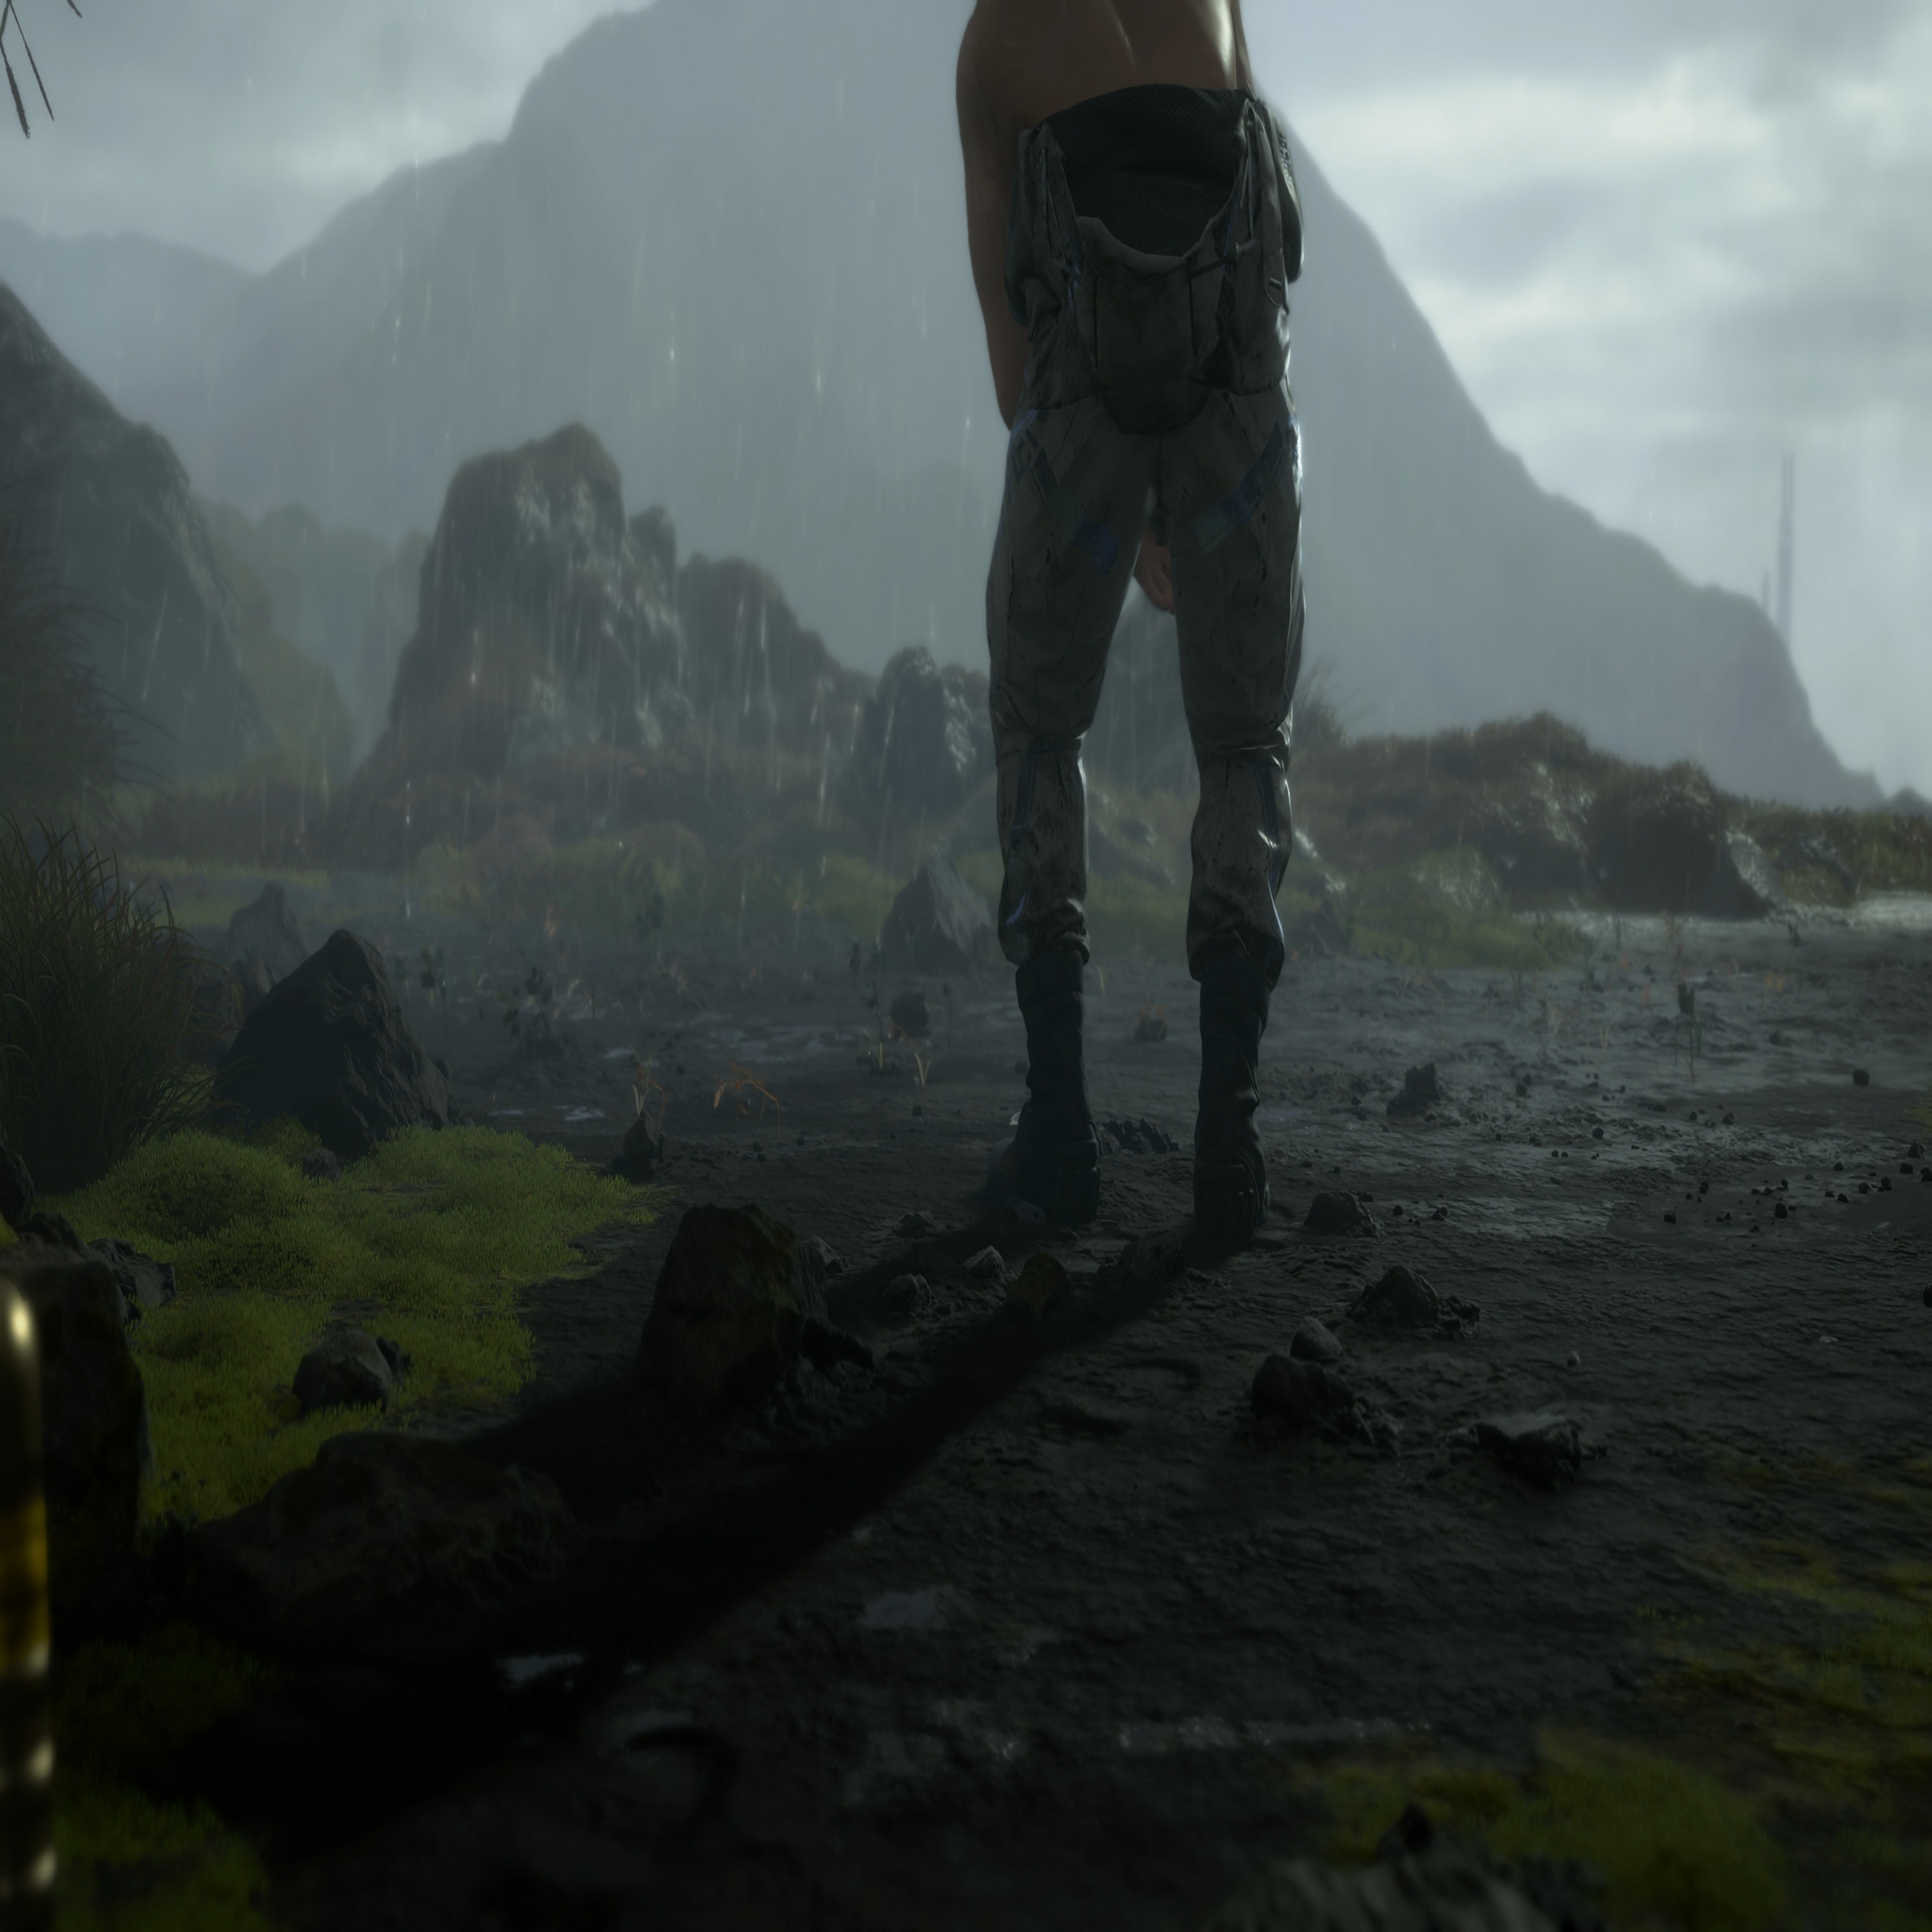 Death Stranding Director's Cut For PS5 Might Make Life Too Easy